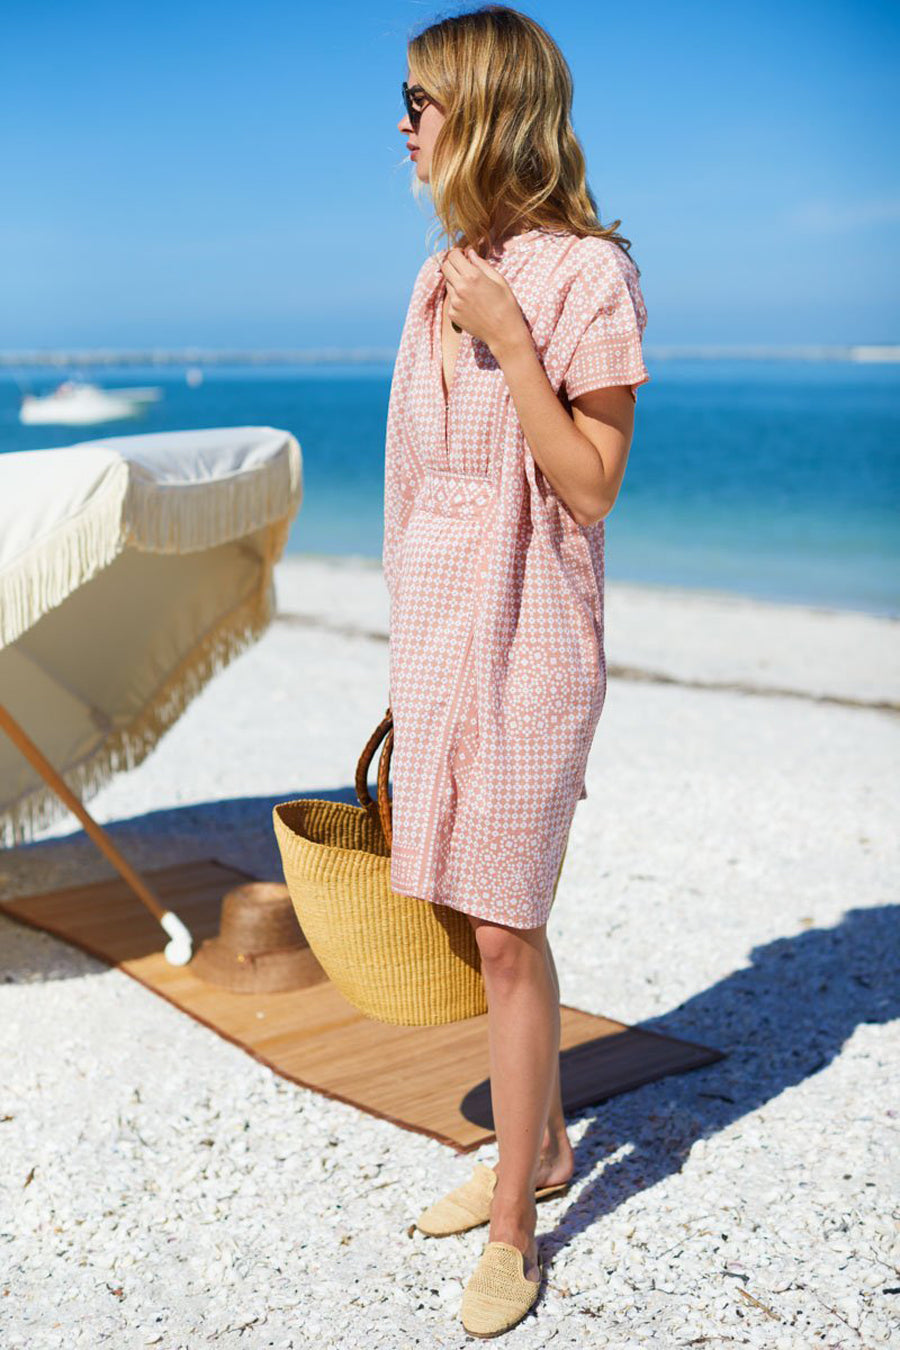 Emerson Fry Emerson Short Caftan in Muted Clay Organic print with woven bag, slides, and sunglasses at Inner Beach Co, Toronto, Canada